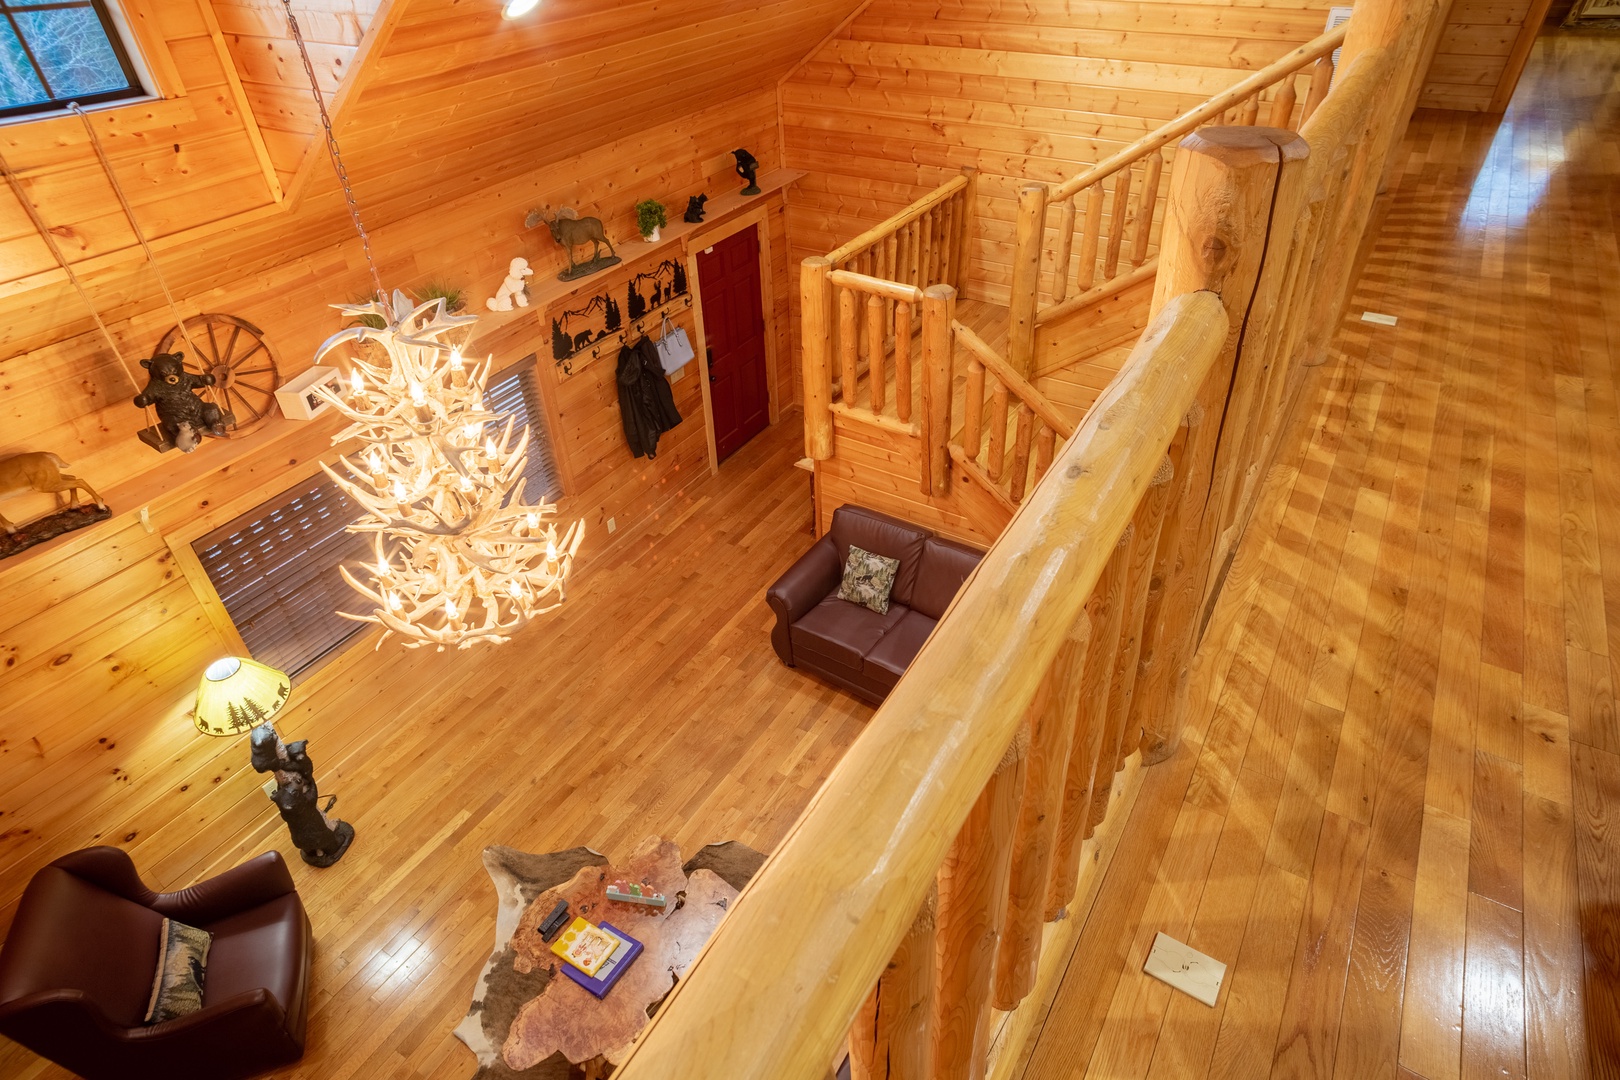 View from the loft at 3 Crazy Cubs, a 5 bedroom cabin rental located in pigeon forge